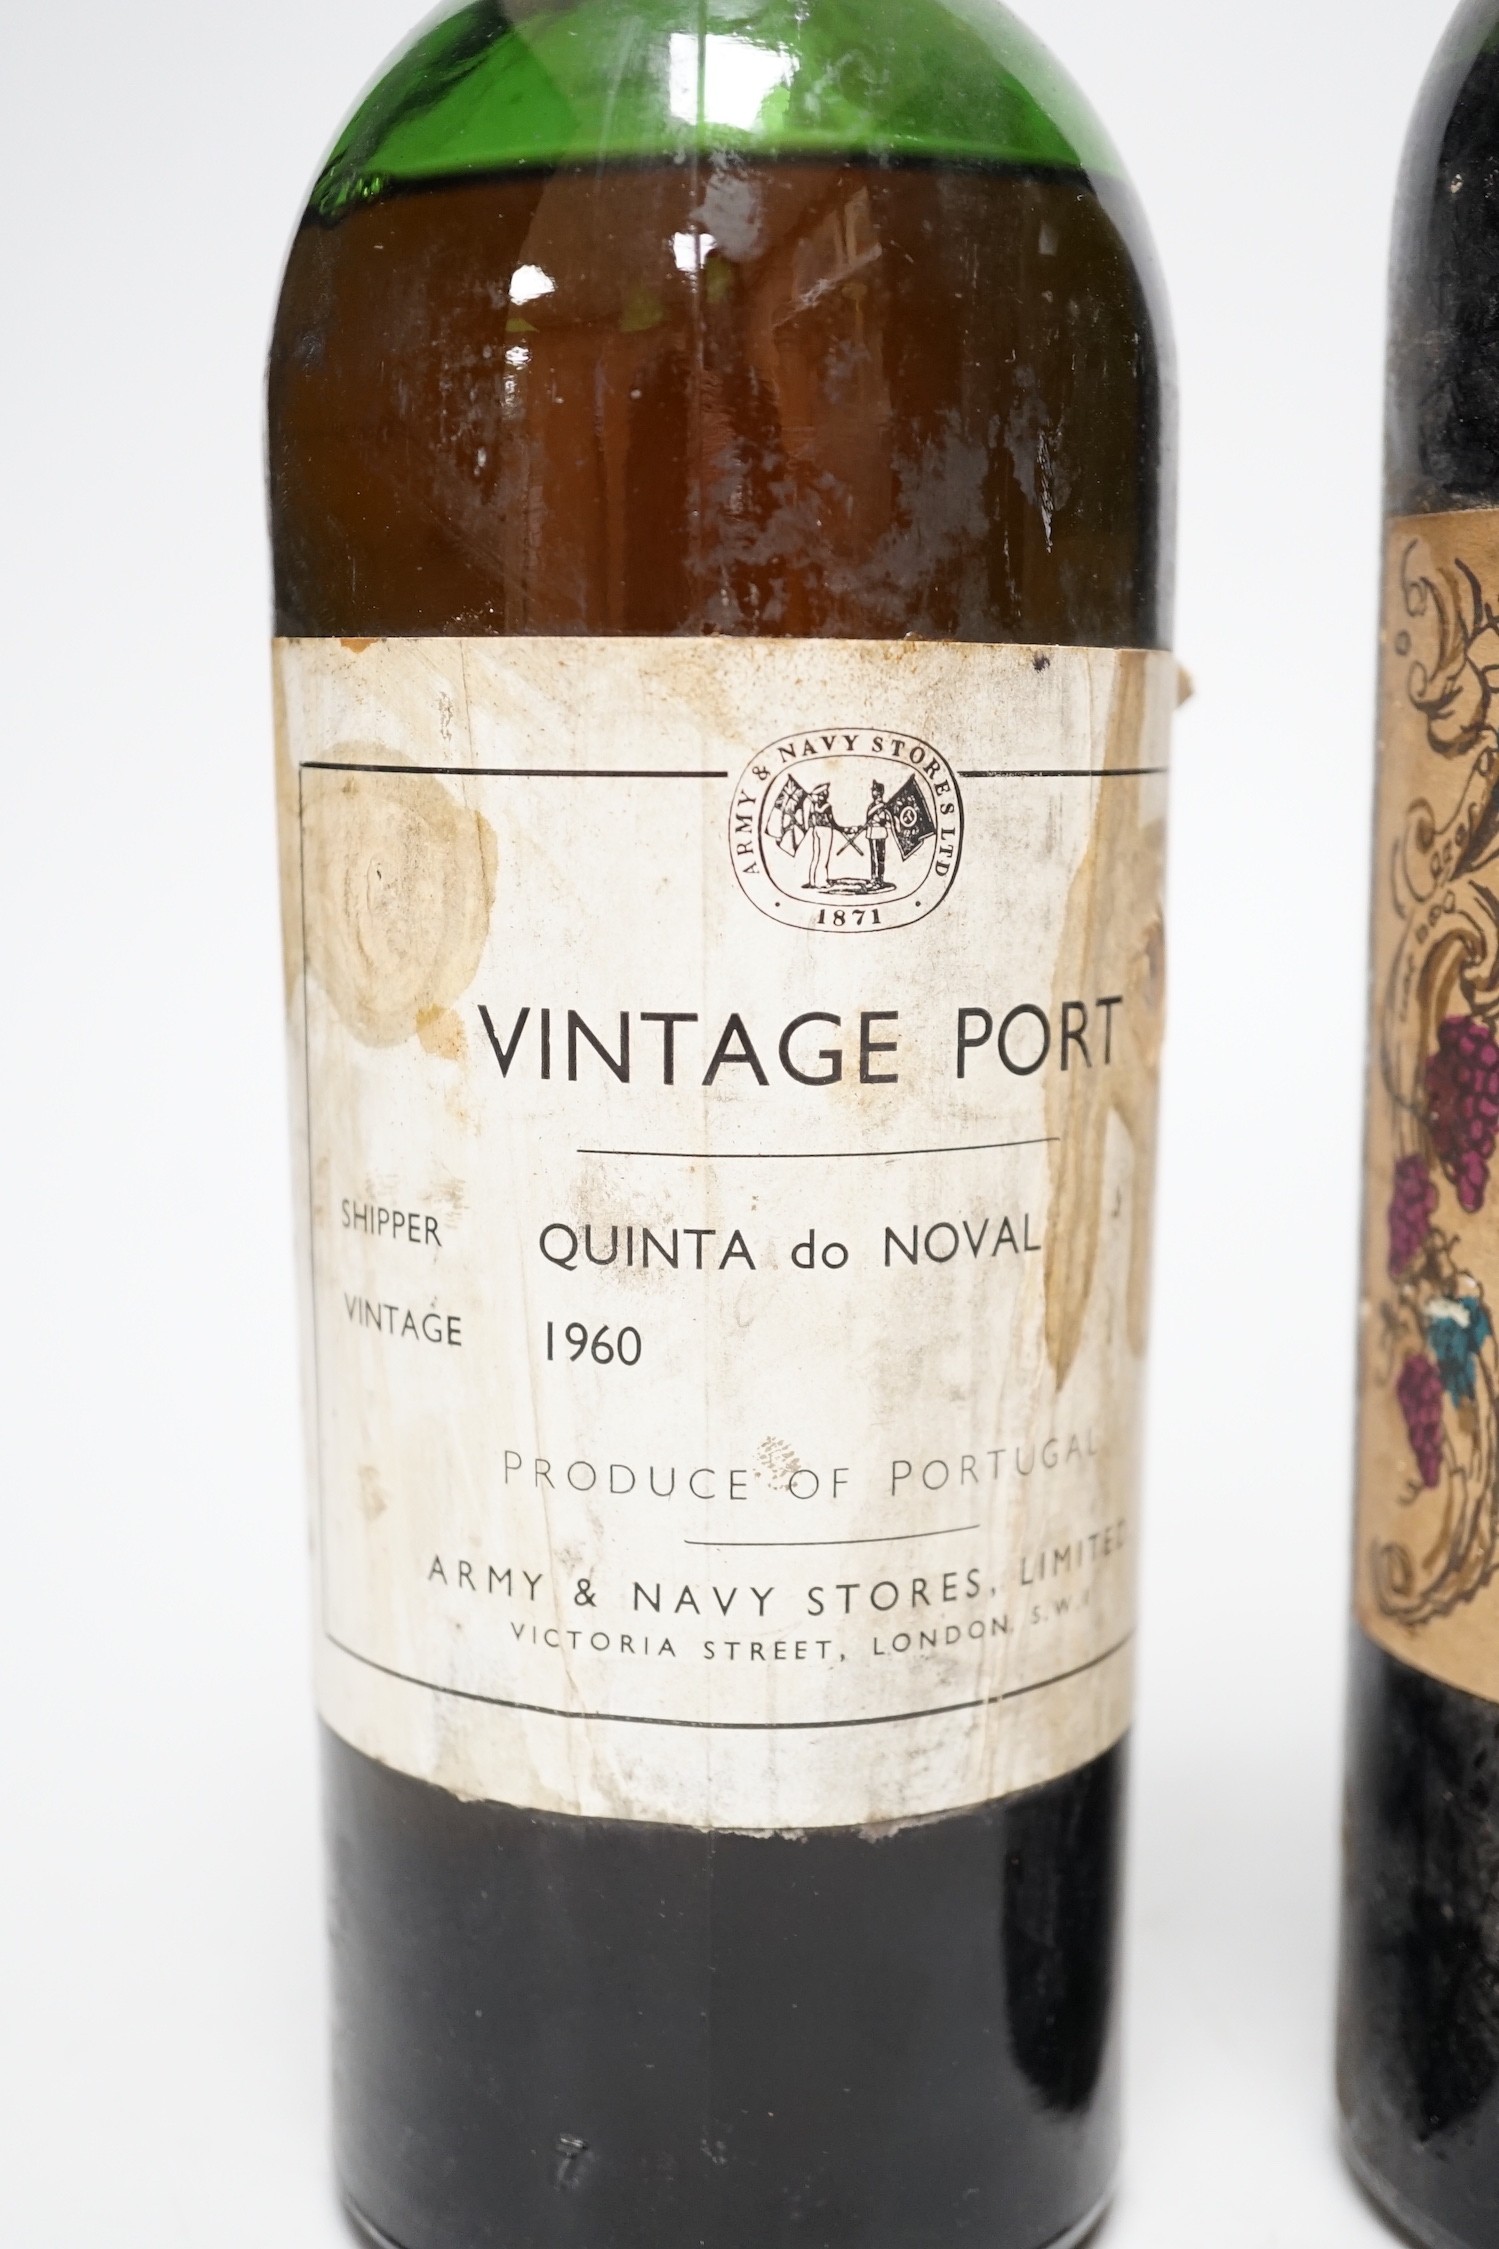 A bottle of Army and Navy stores 1960 vintage port and a bottle of Chateau Calon-Segur 1962 - Image 2 of 5